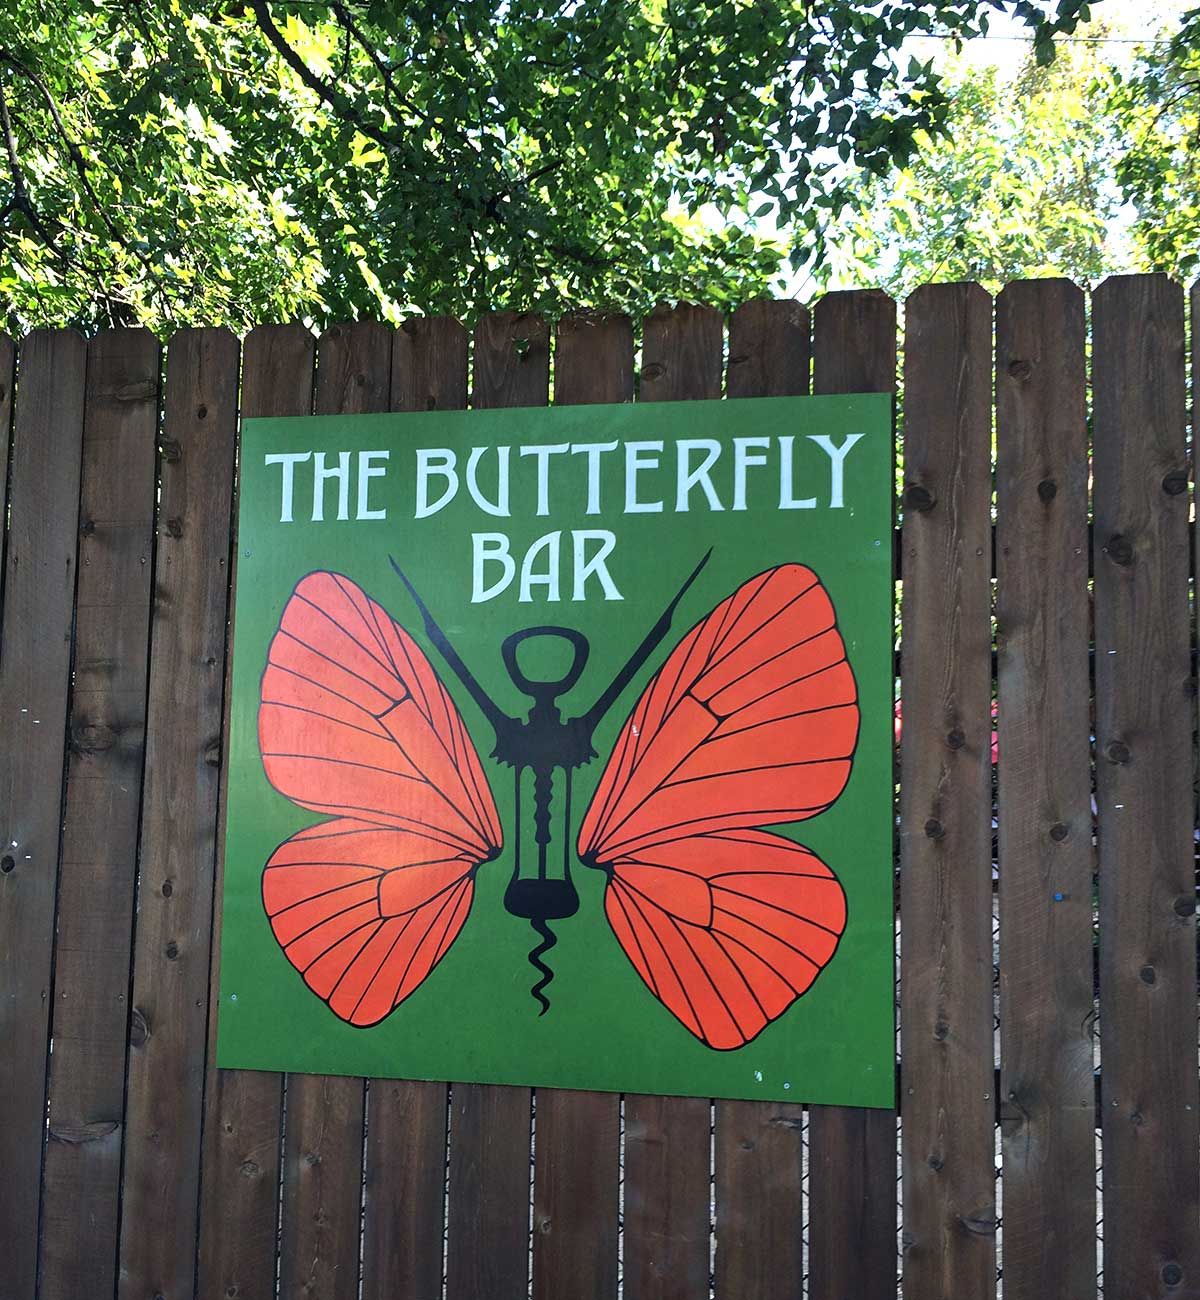 The Butterfly Bar